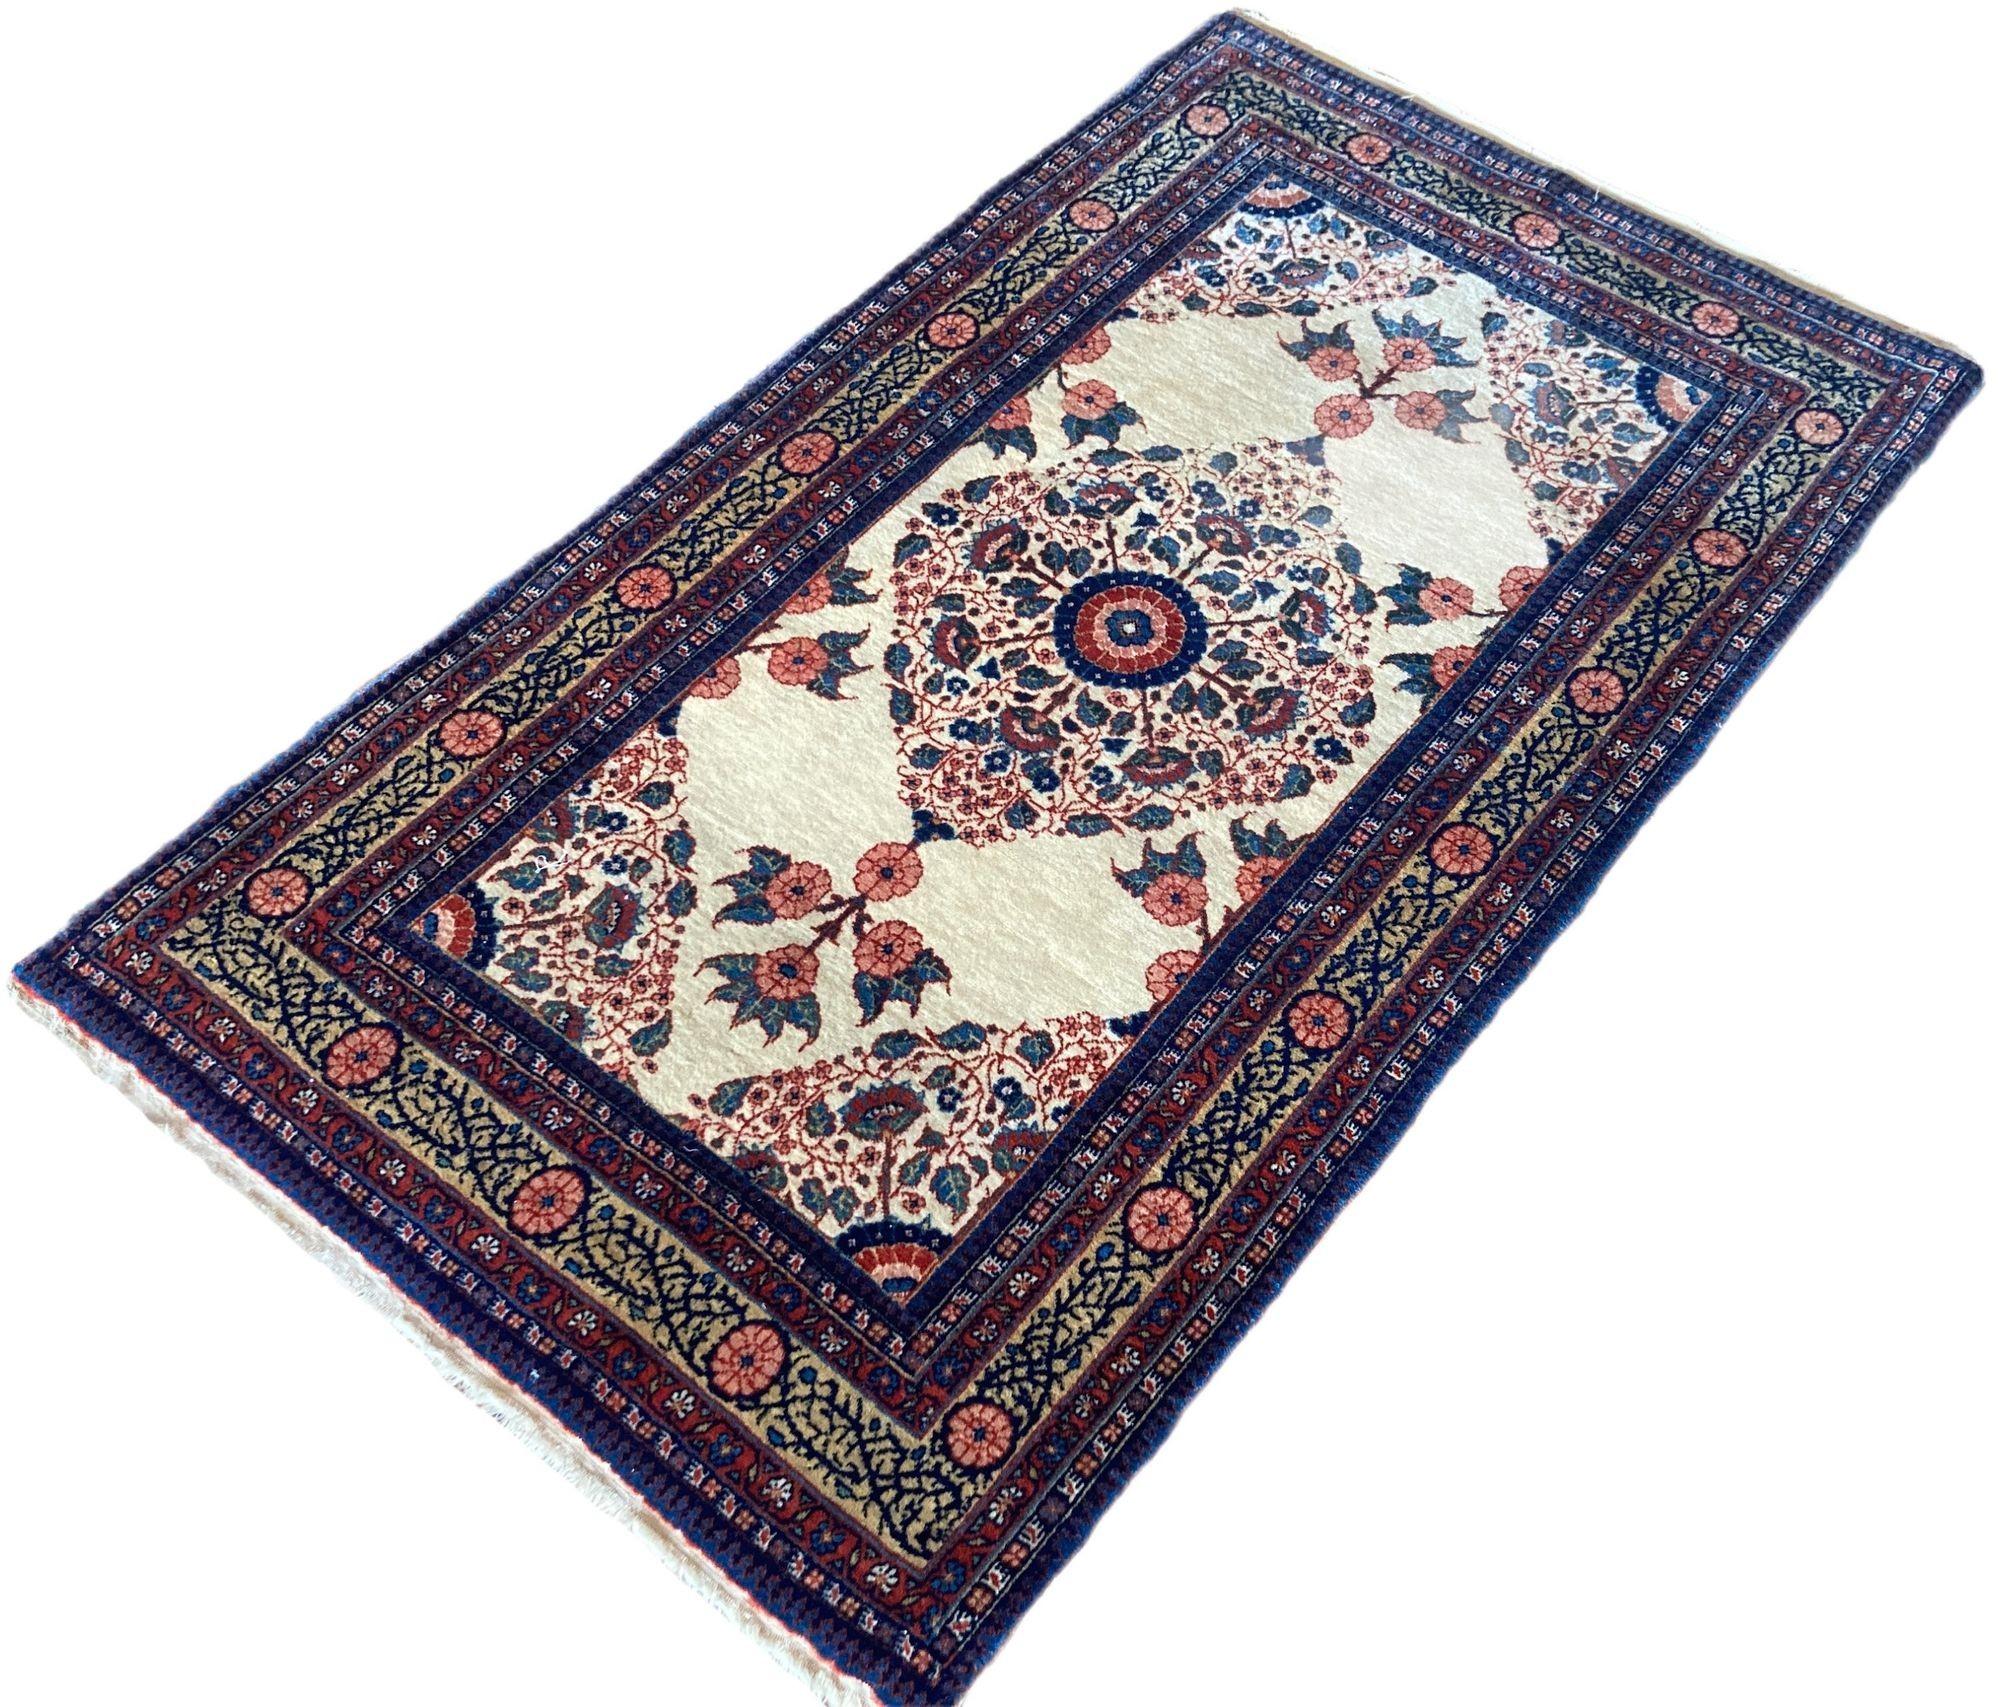 Antique Mashad Rug 1.34m X 0.79m In Good Condition For Sale In St. Albans, GB